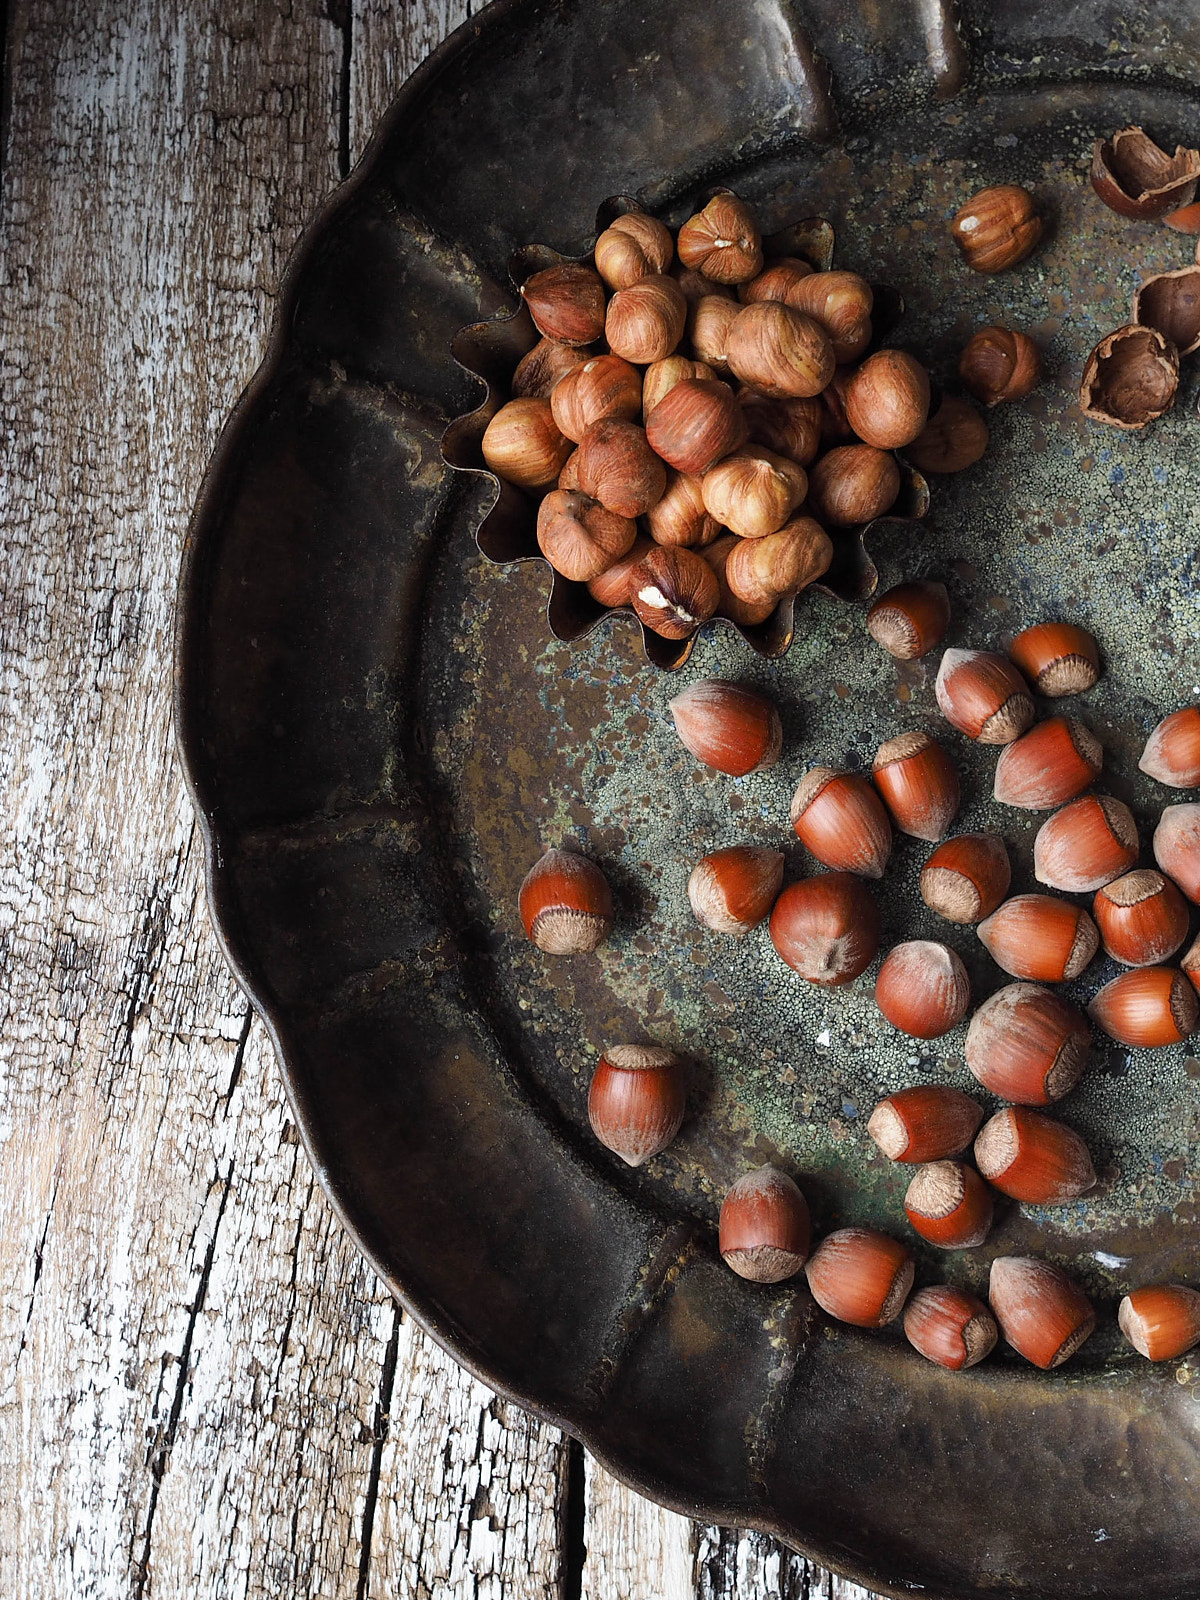 Sigma 19mm F2.8 DN Art sample photo. Hazelnuts scattered on an old metal platter and to photography